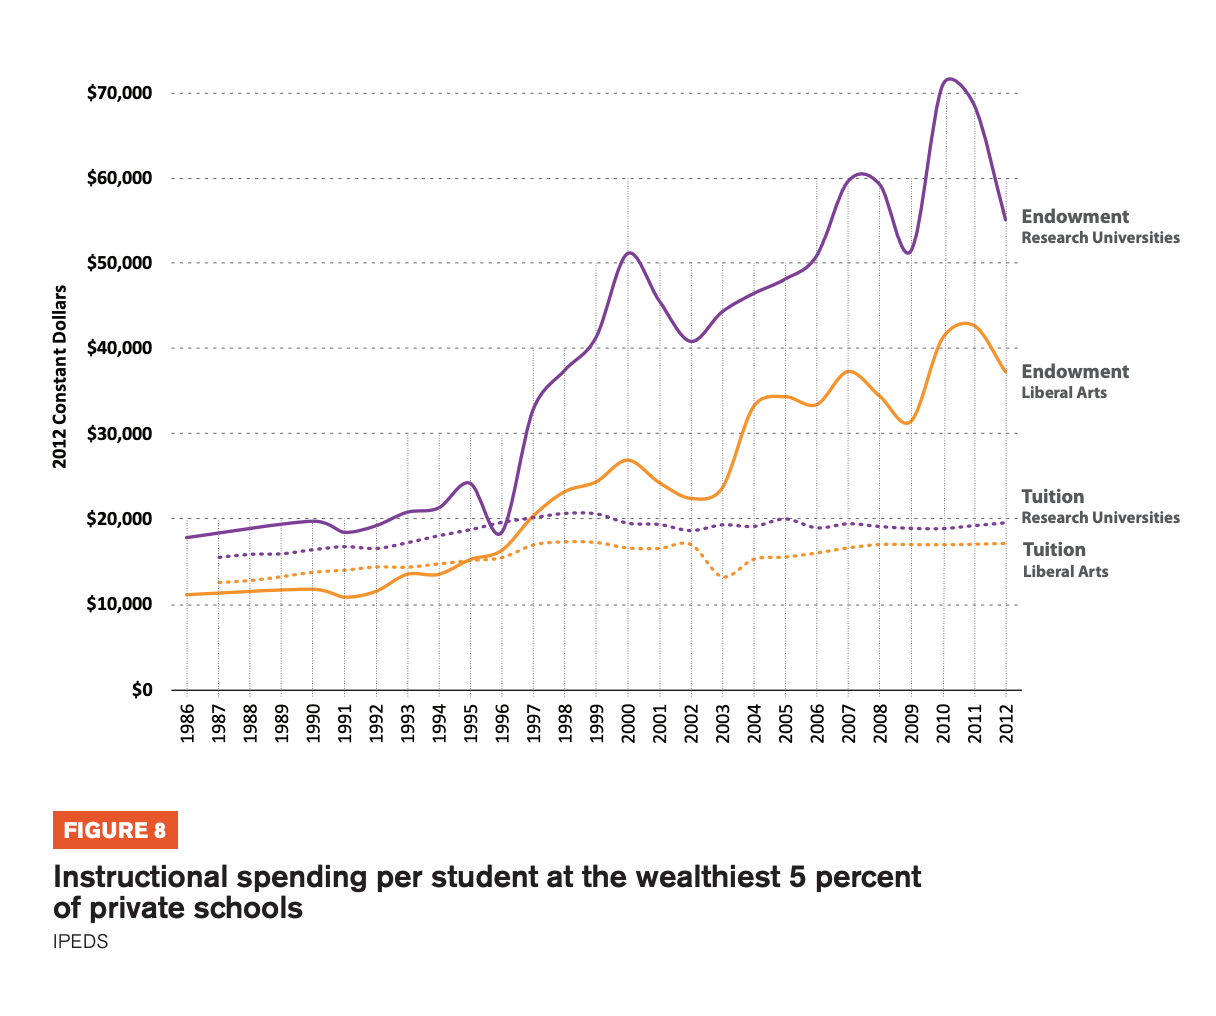 Figure 8 includes a graph showcasing instructional spending per student at the wealthiest 5 percent of private schools 